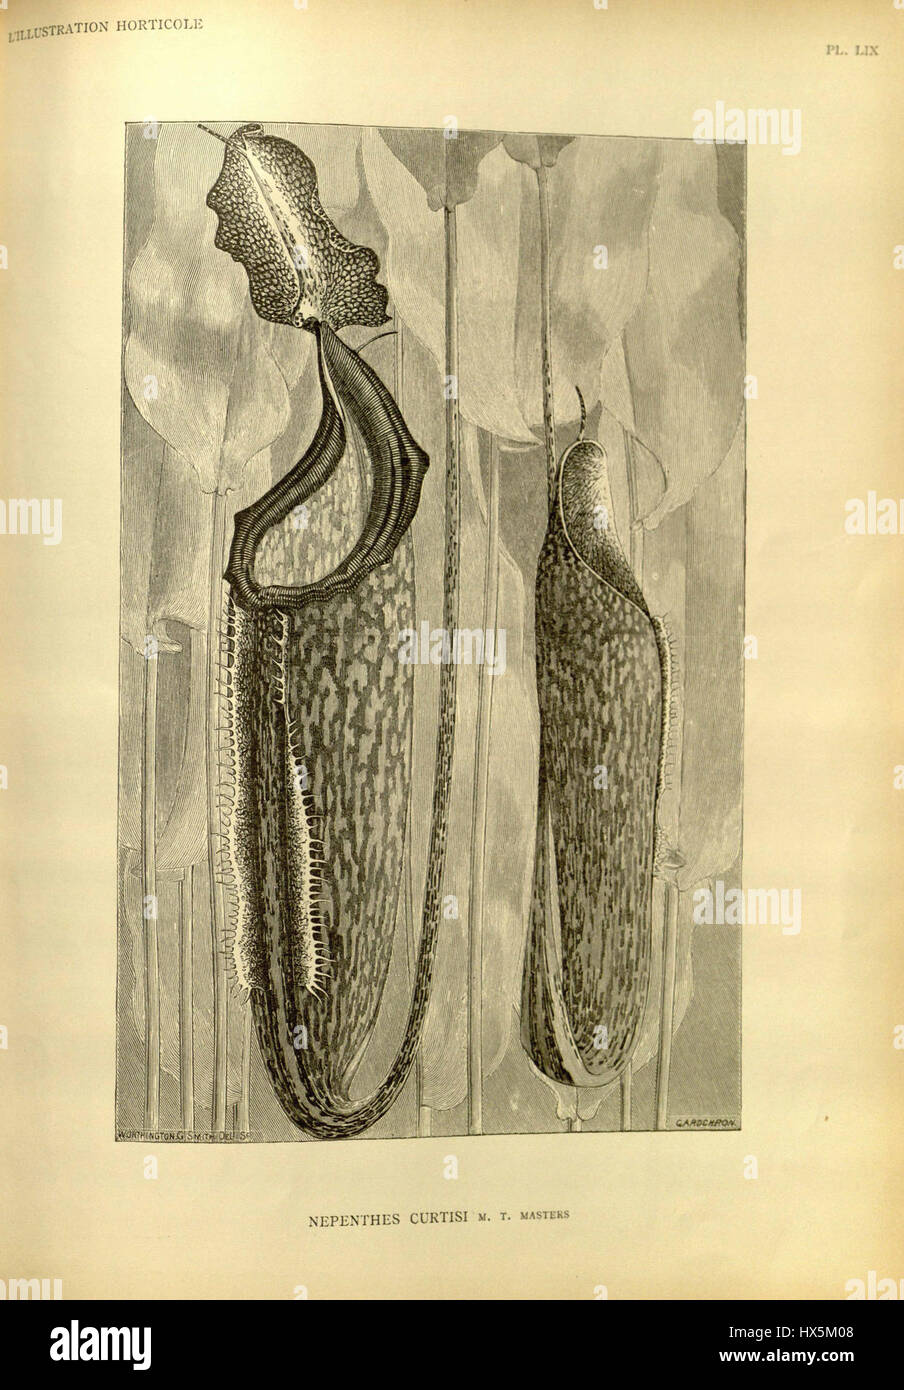 Nepenthes curtisii   LE28099Illustration horticole (1888) Stock Photo